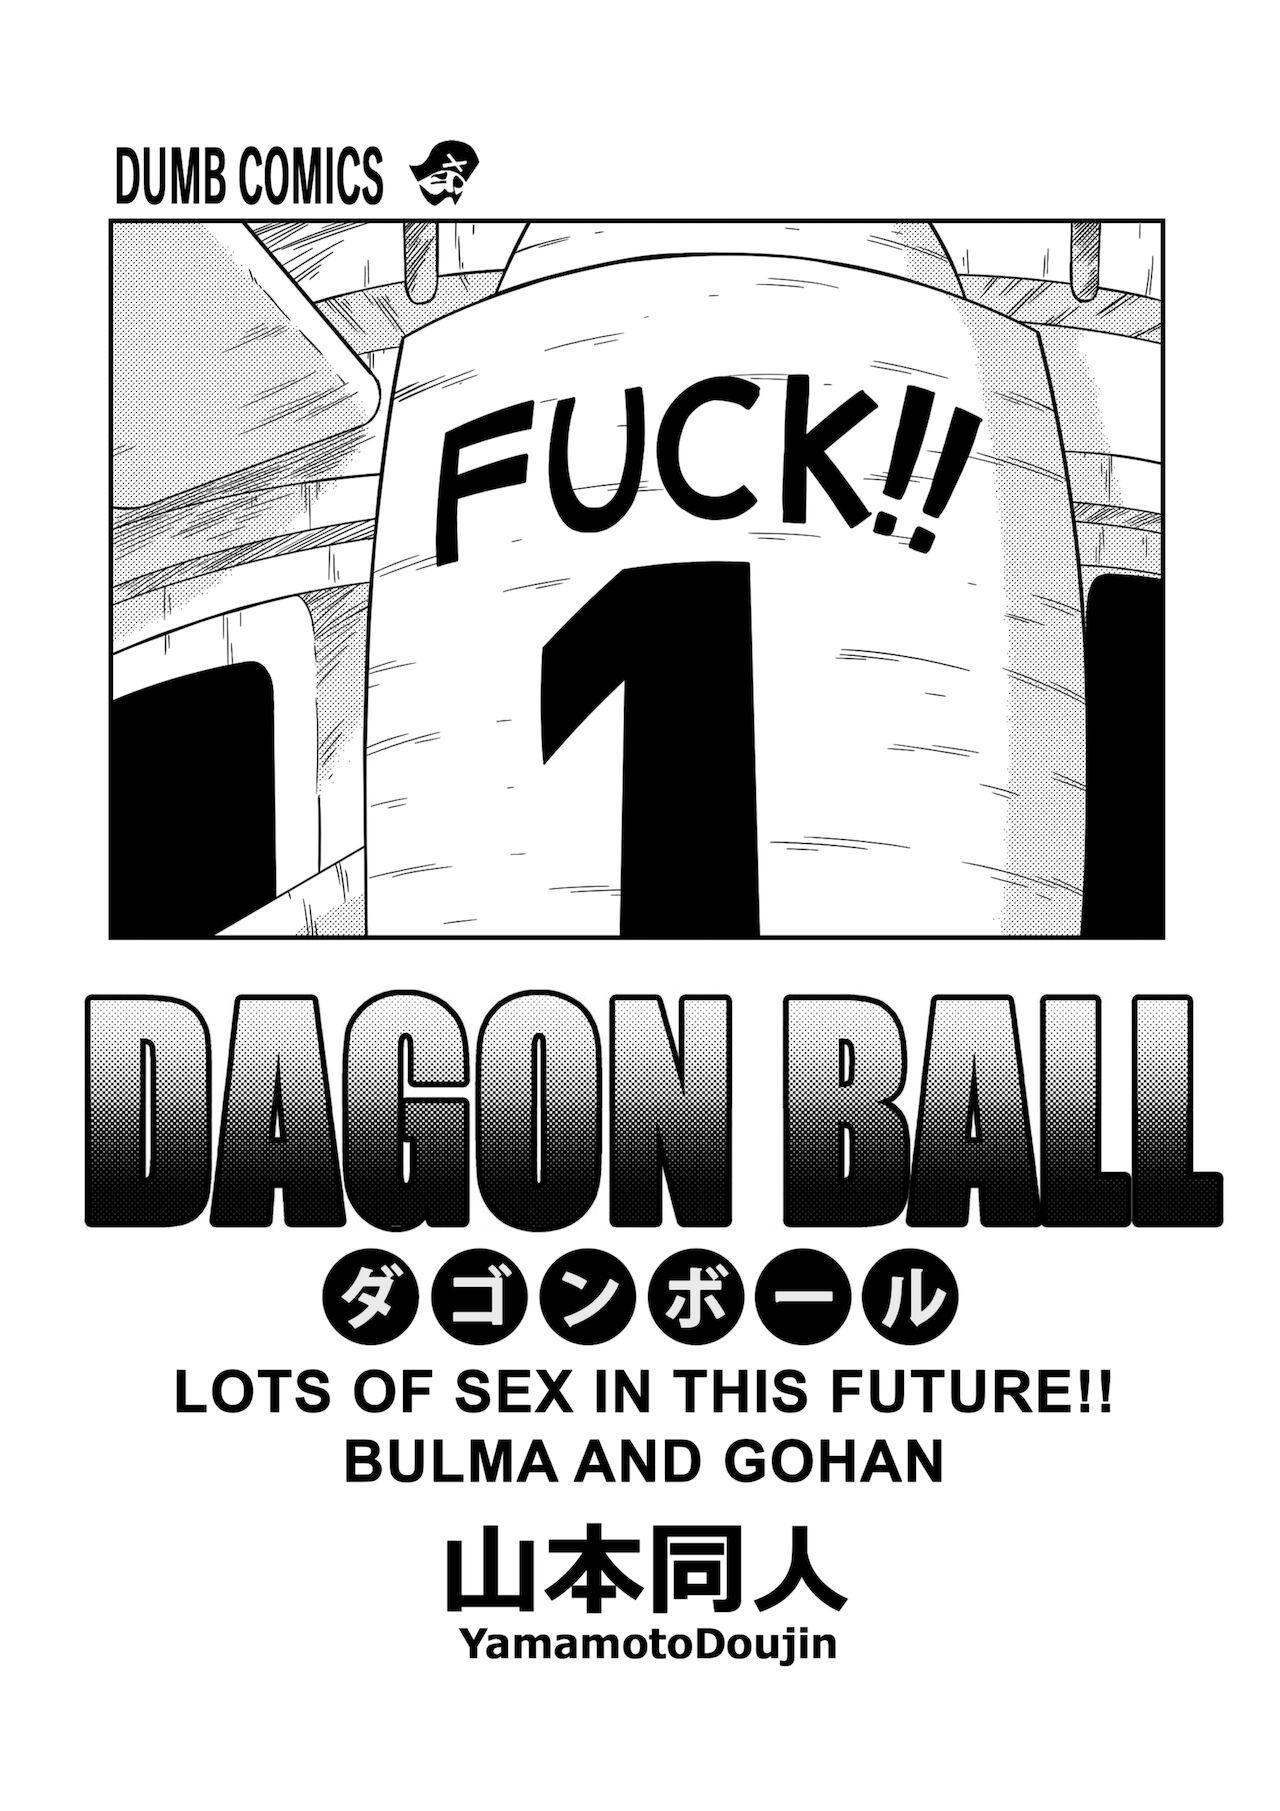 Fat Lots of Sex in this Future!! - Dragon ball z Lovers - Page 2